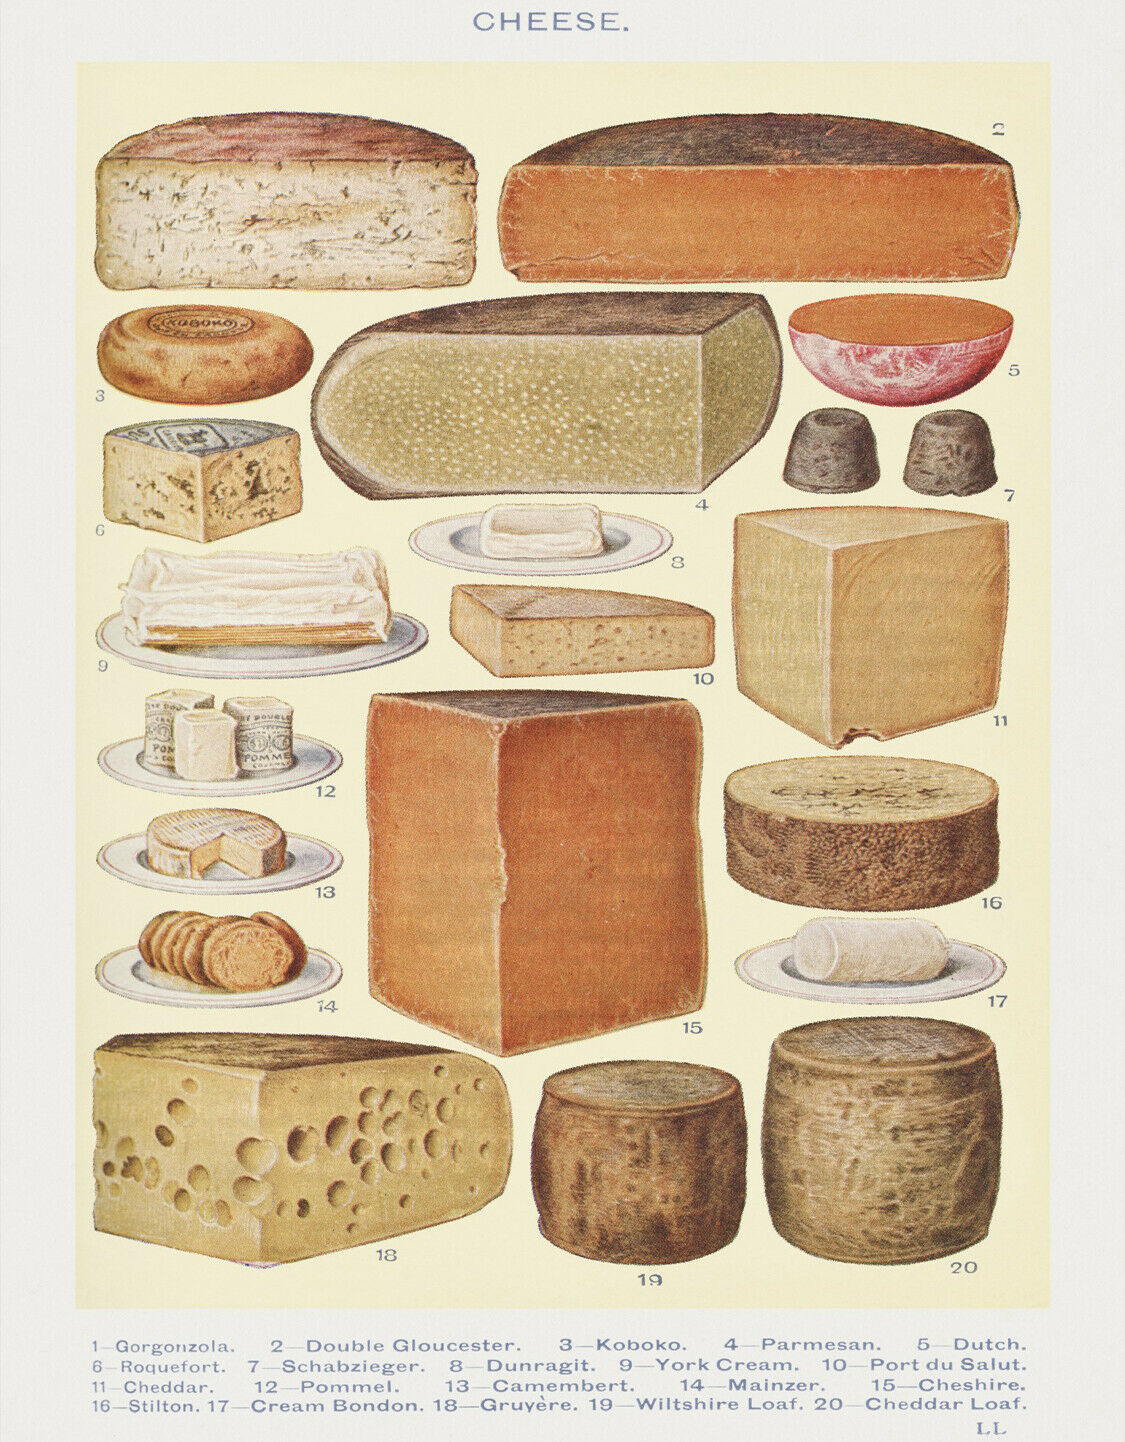 12348.Decoration POSTER.Room interior wall art.Types of Cheese.Restaurant decor